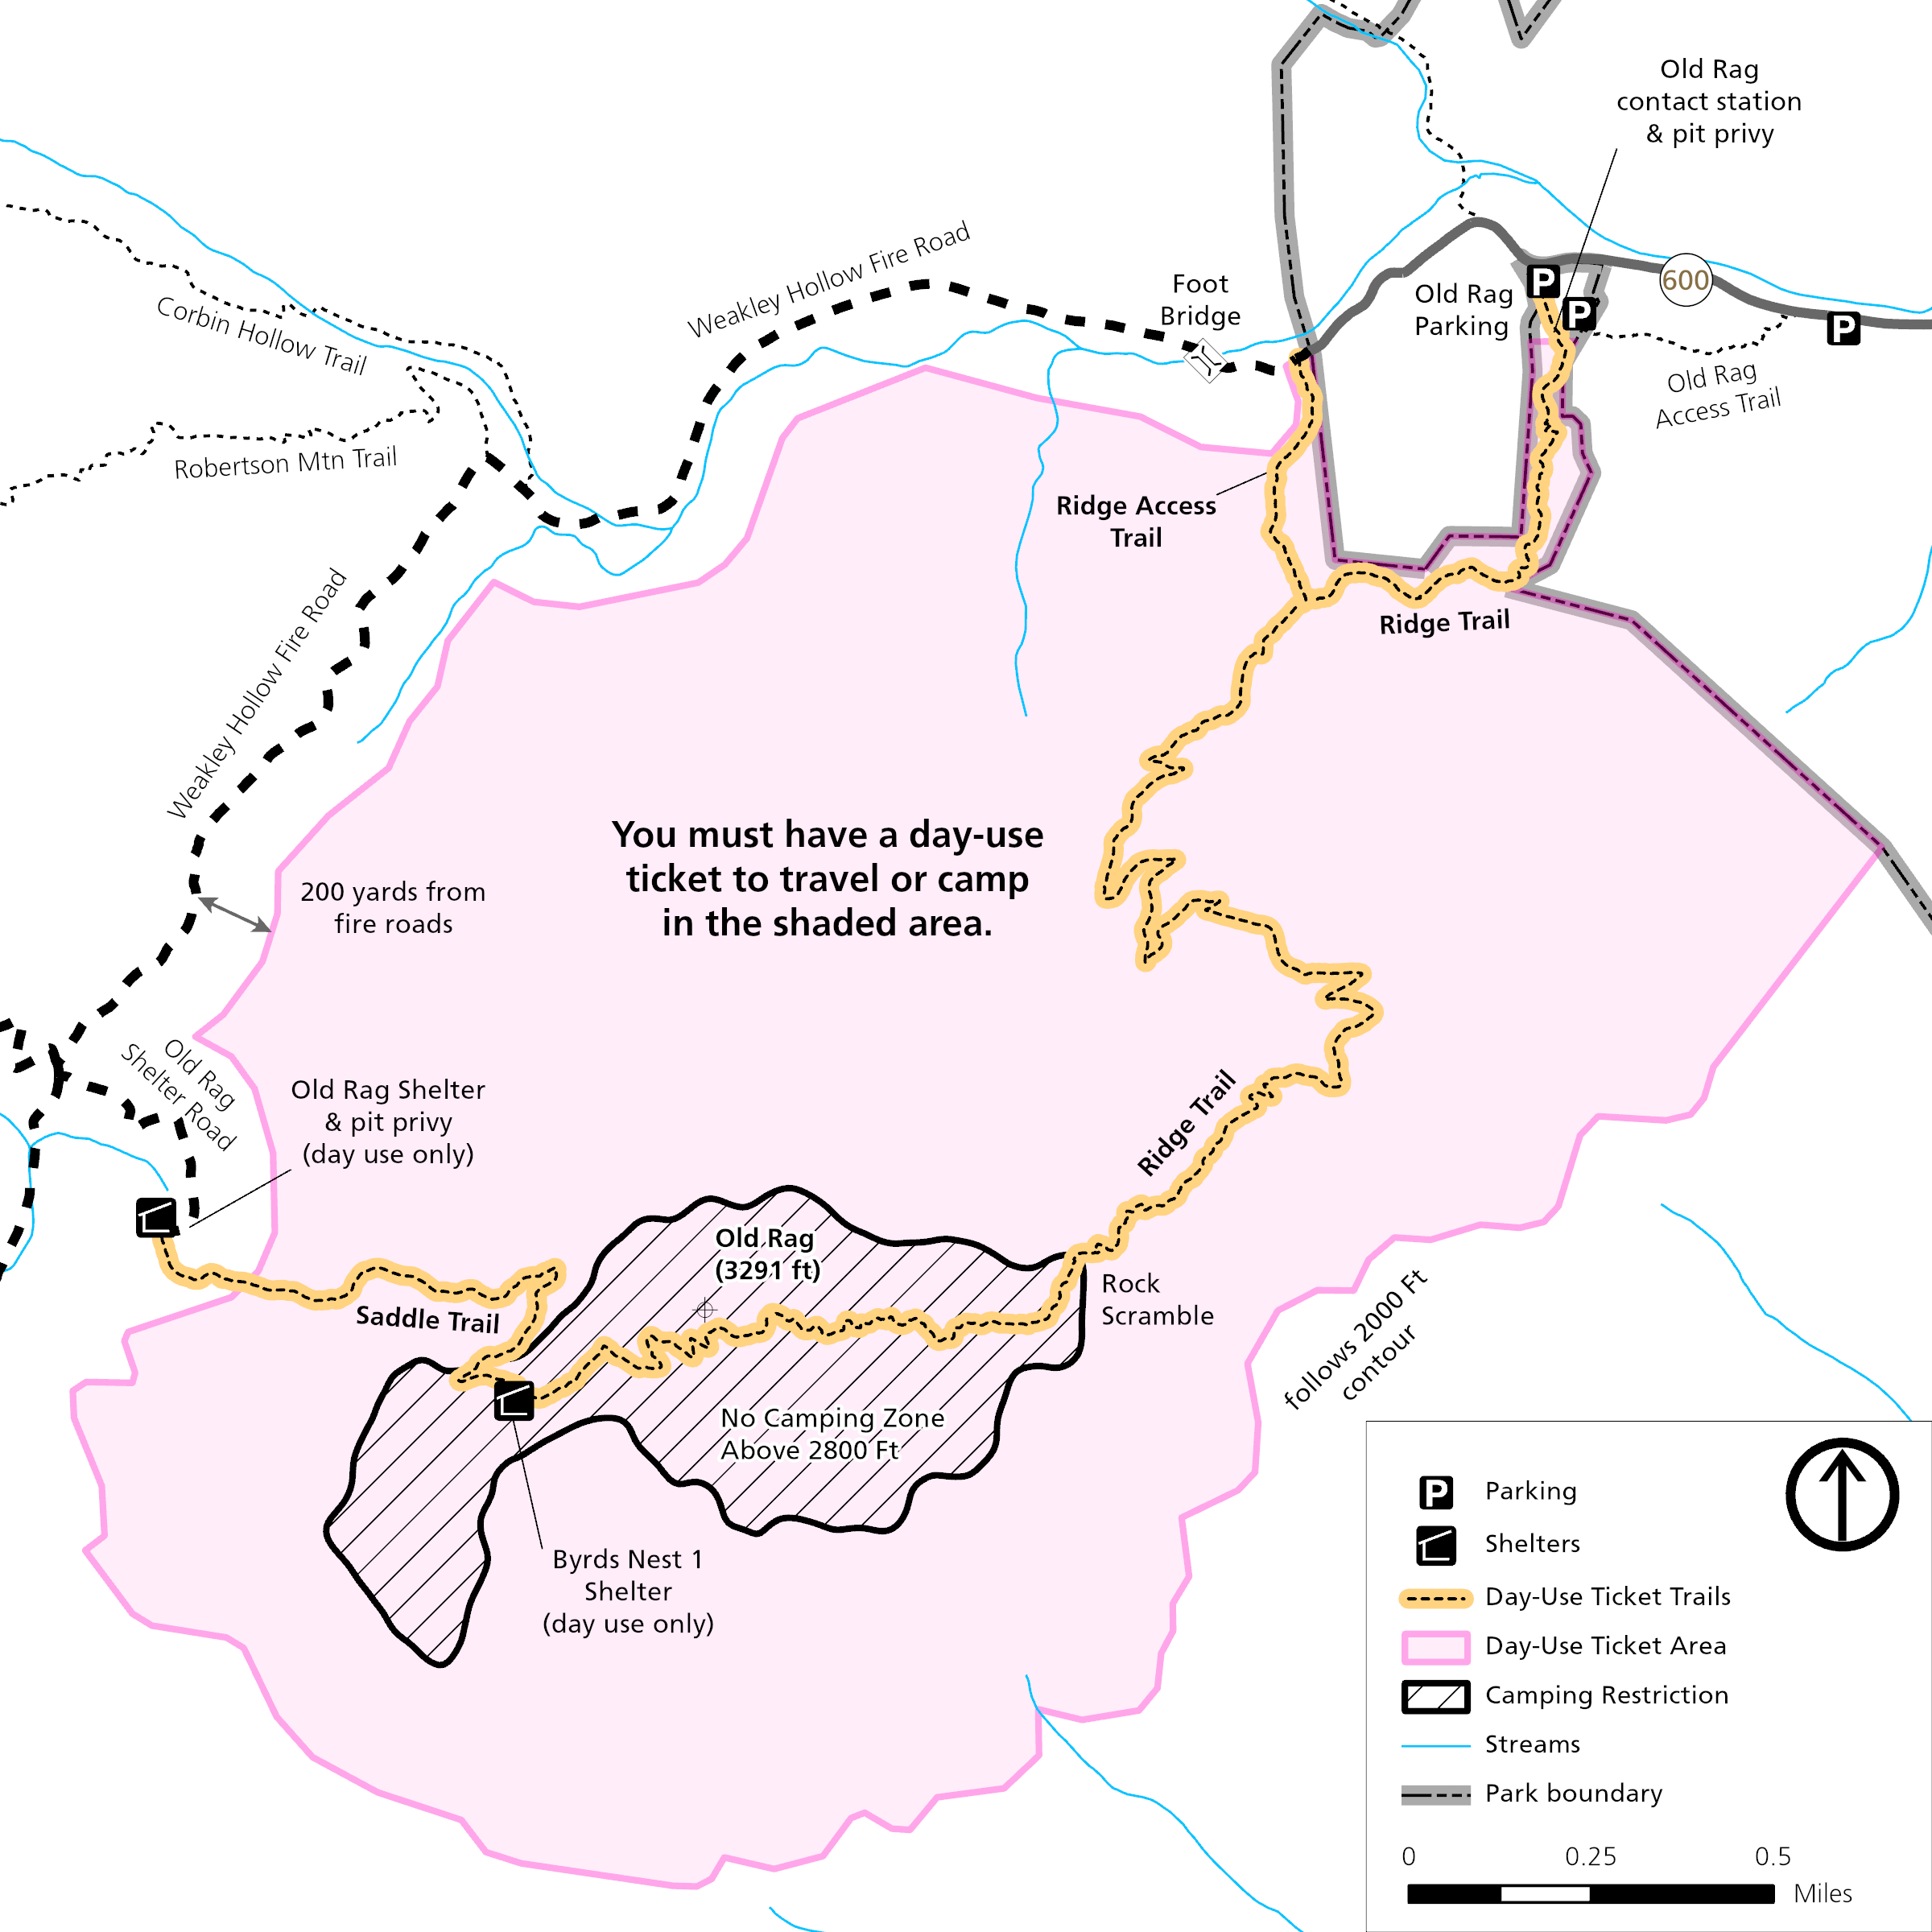 A map of the Old Rag area with highlighted trails.